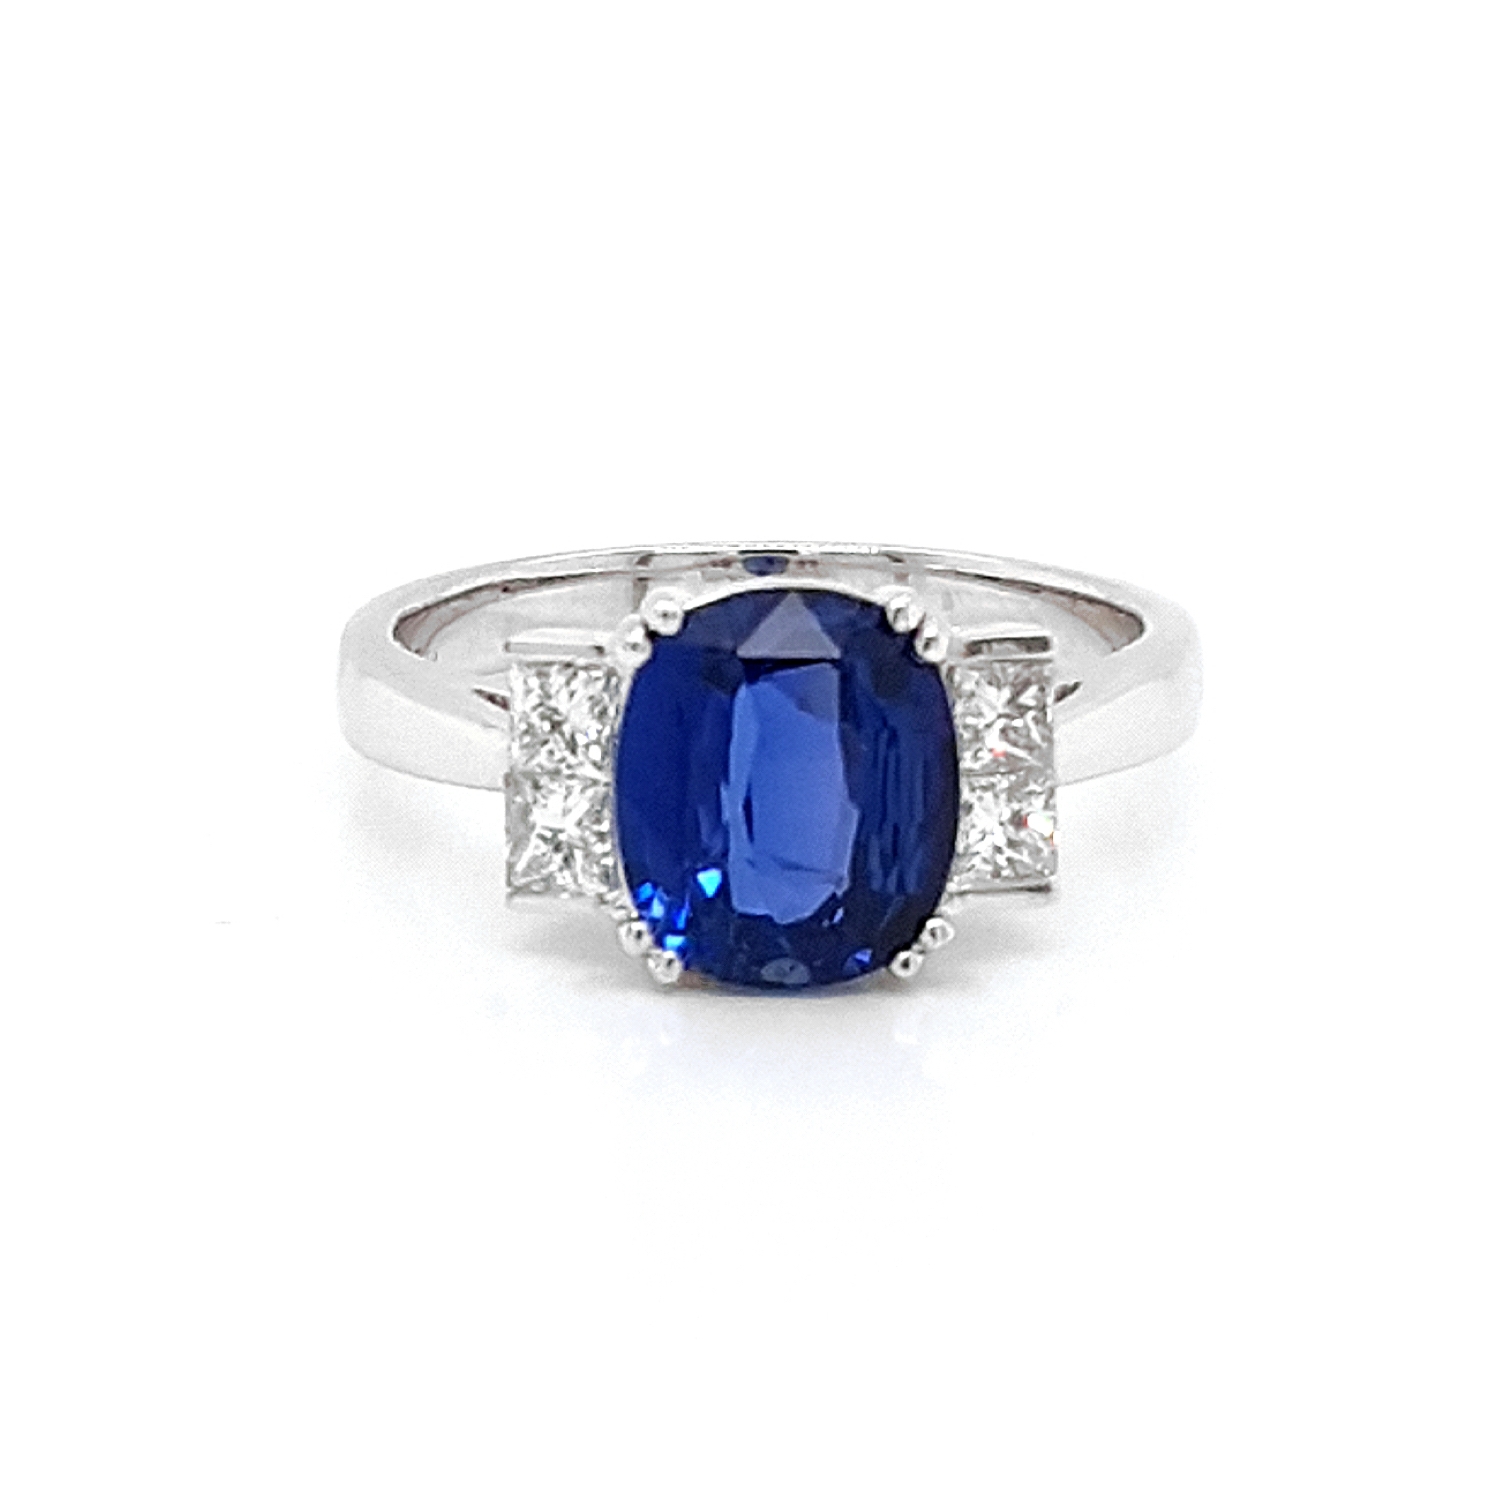 3x3 MM Princess Cut Sapphire and 3/8 Ctw Round Cut Diamond Ring in 14K  White Gold | Dahlkemper's Jewelry